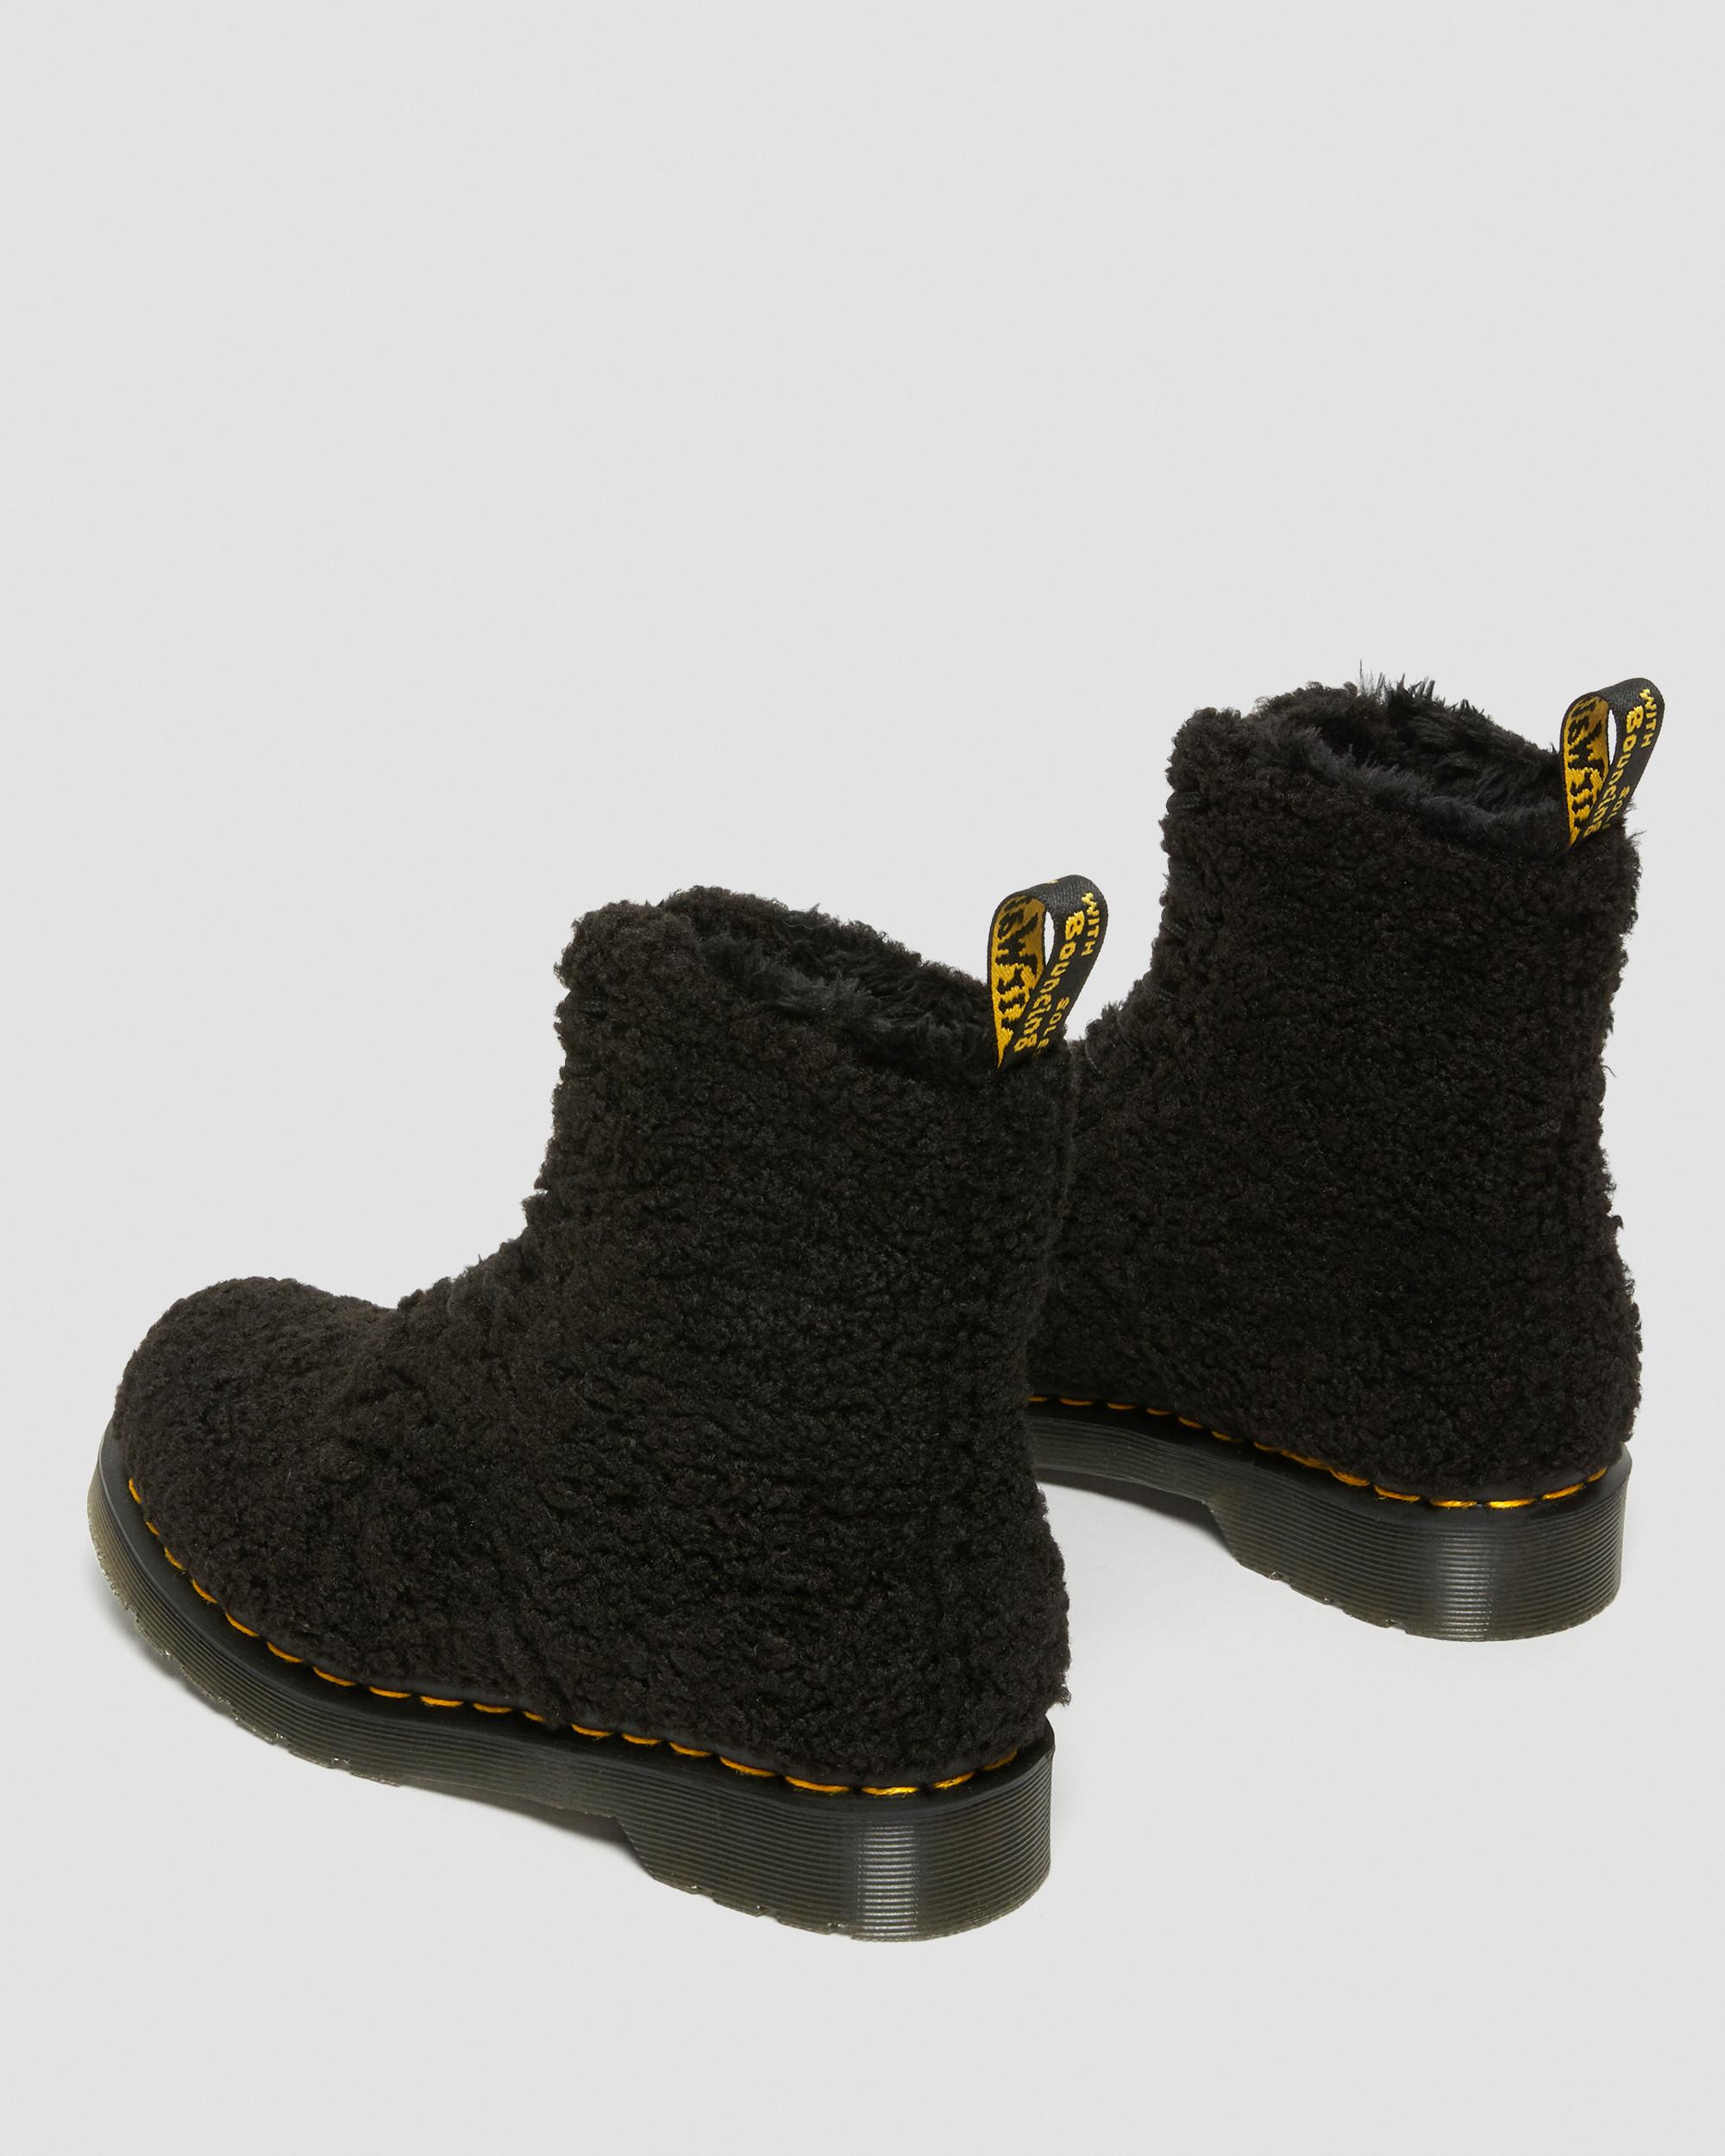 1460 Pascal Women's Faux Shearling Boots in Black | Dr. Martens